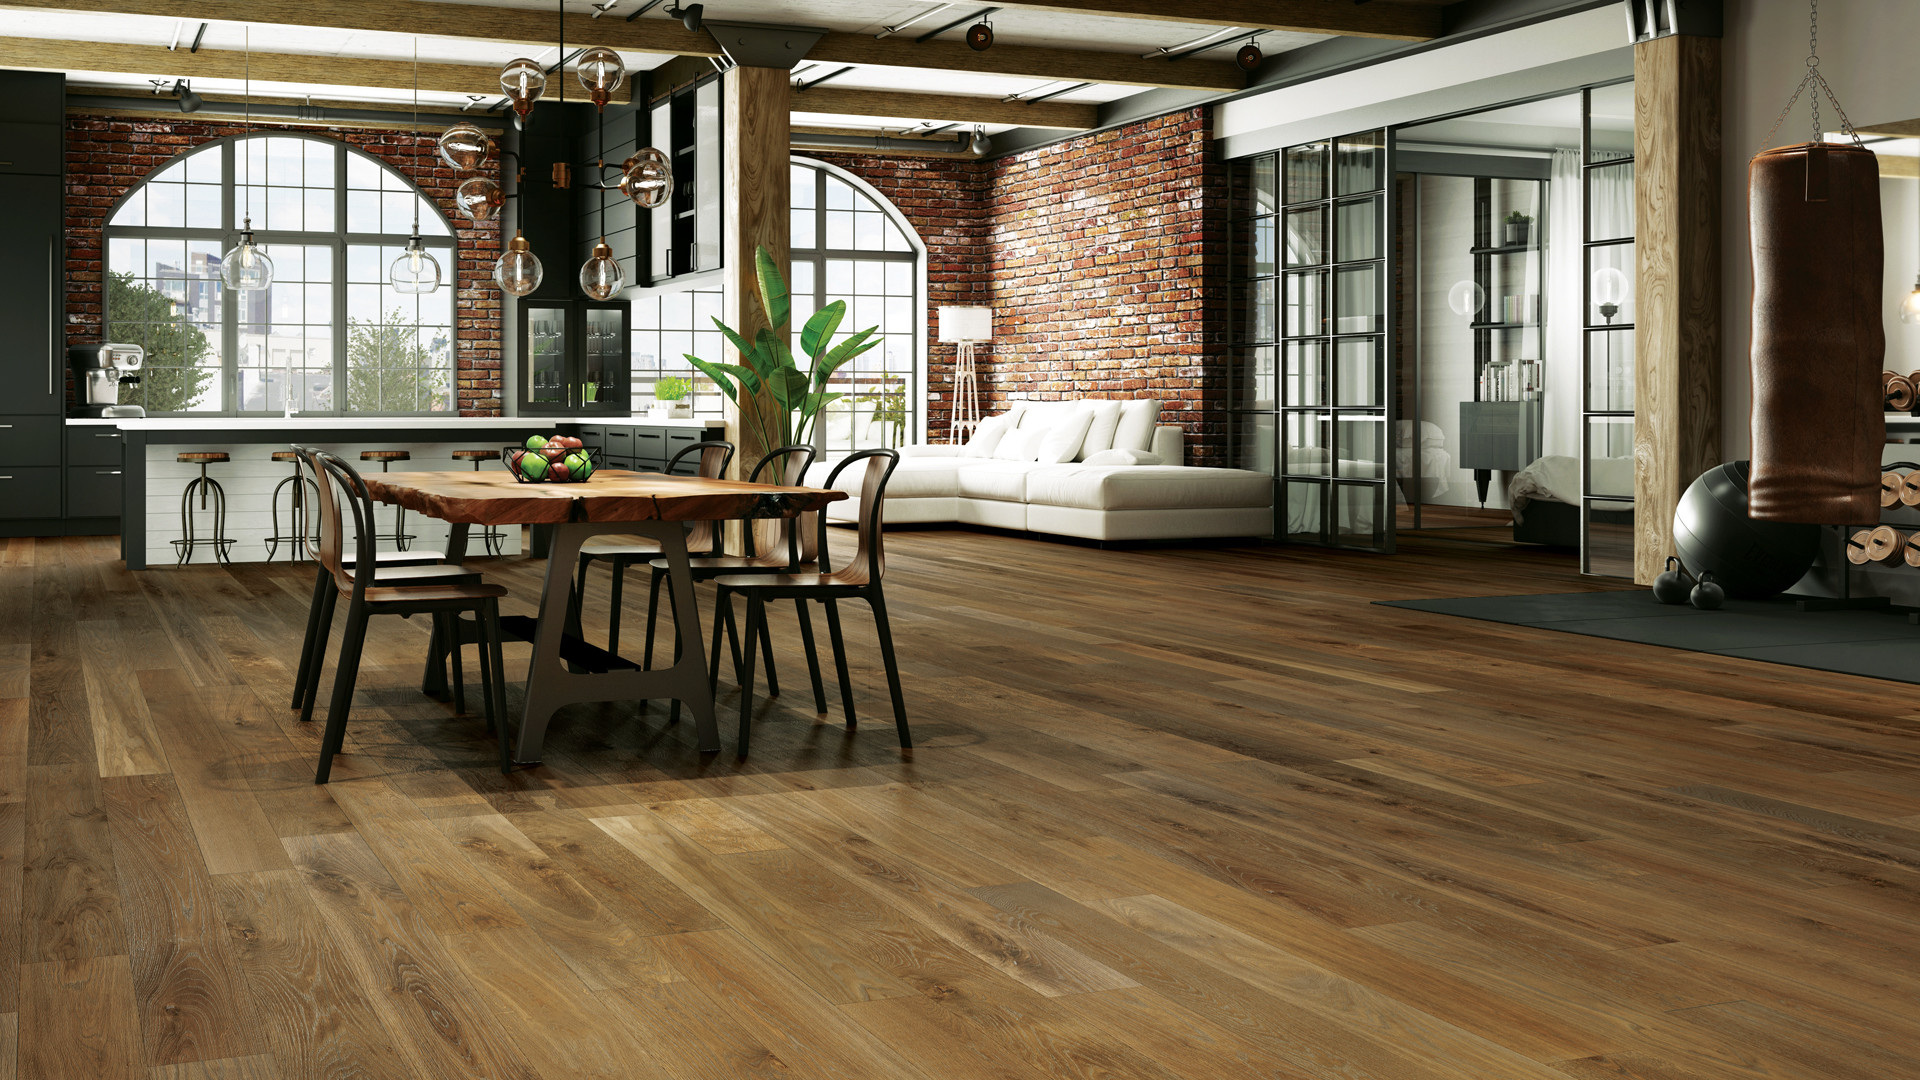 mahogany hardwood flooring prices of 4 latest hardwood flooring trends of 2018 lauzon flooring pertaining to combined with a wire brushed texture and an ultra matte sheen these new 7a½ wide white oak hardwood floors will definitely add character to your home